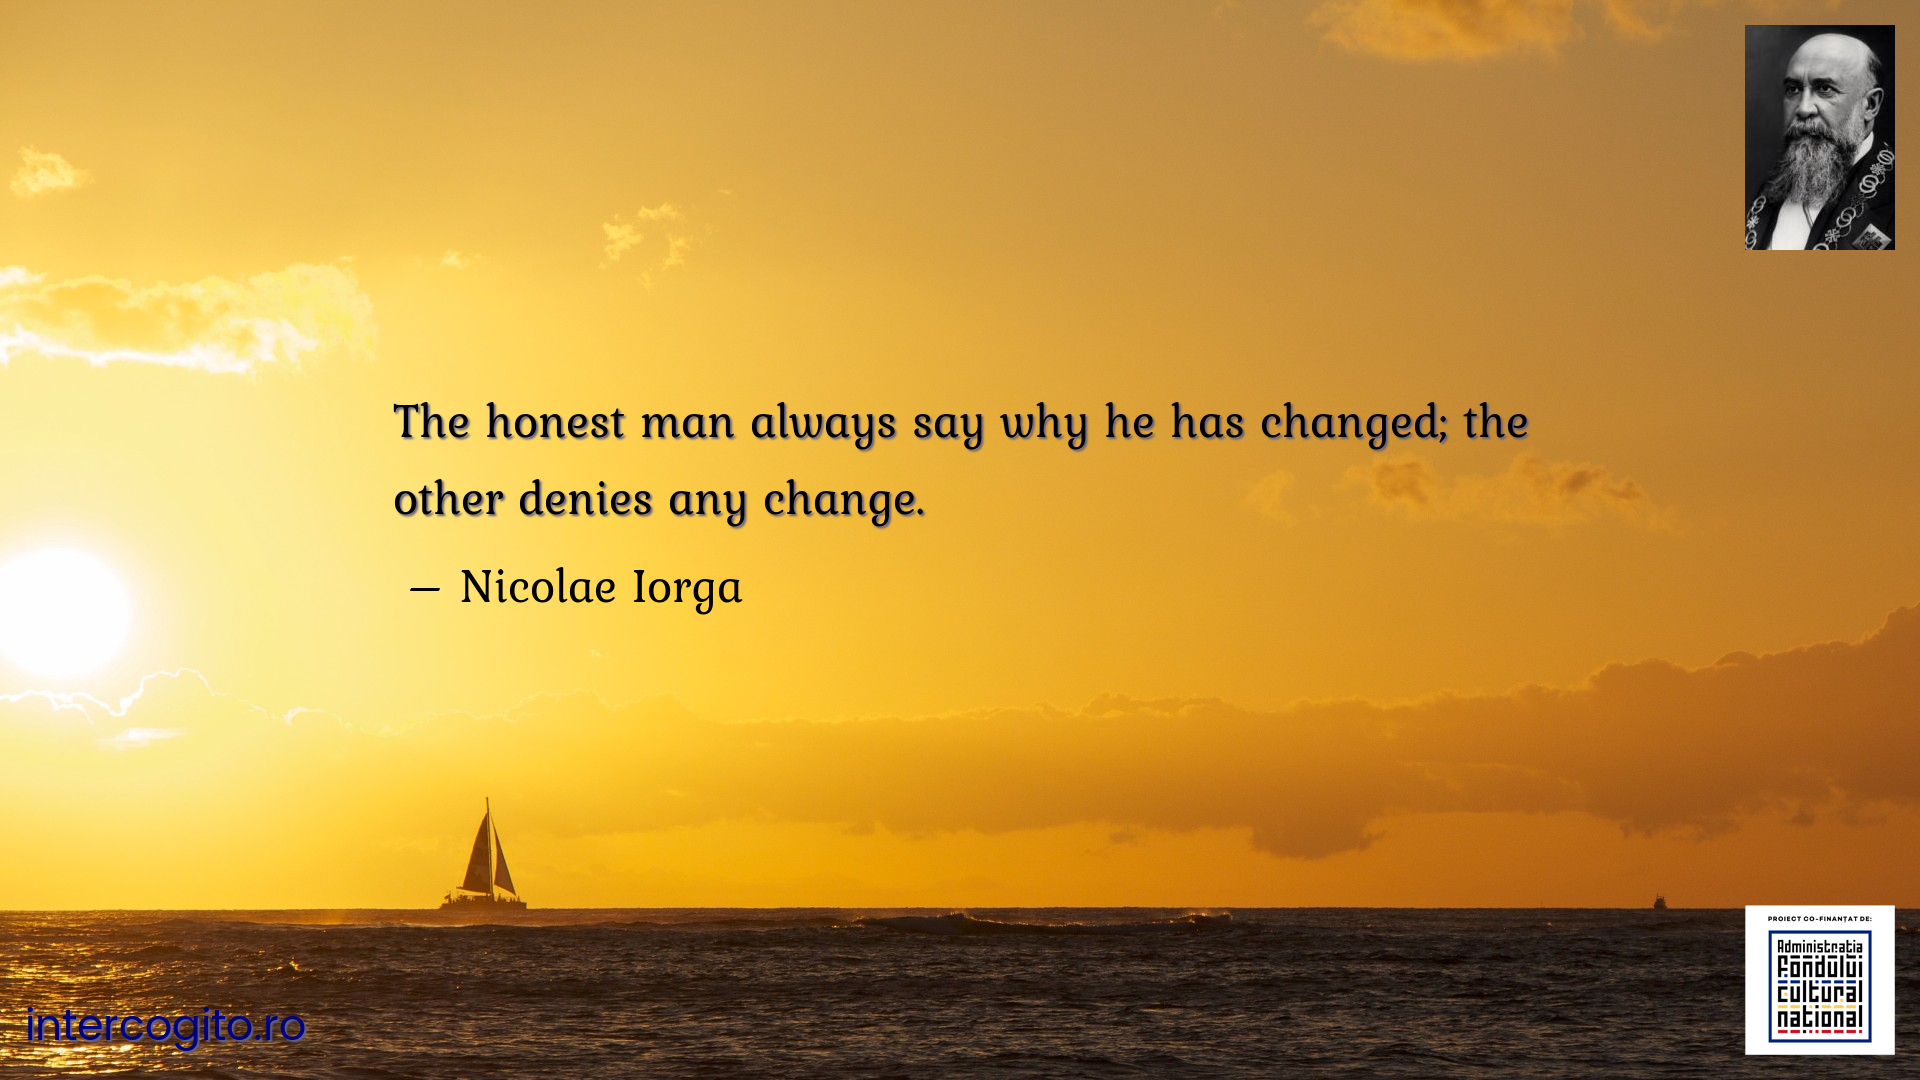 The honest man always say why he has changed; the other denies any change.